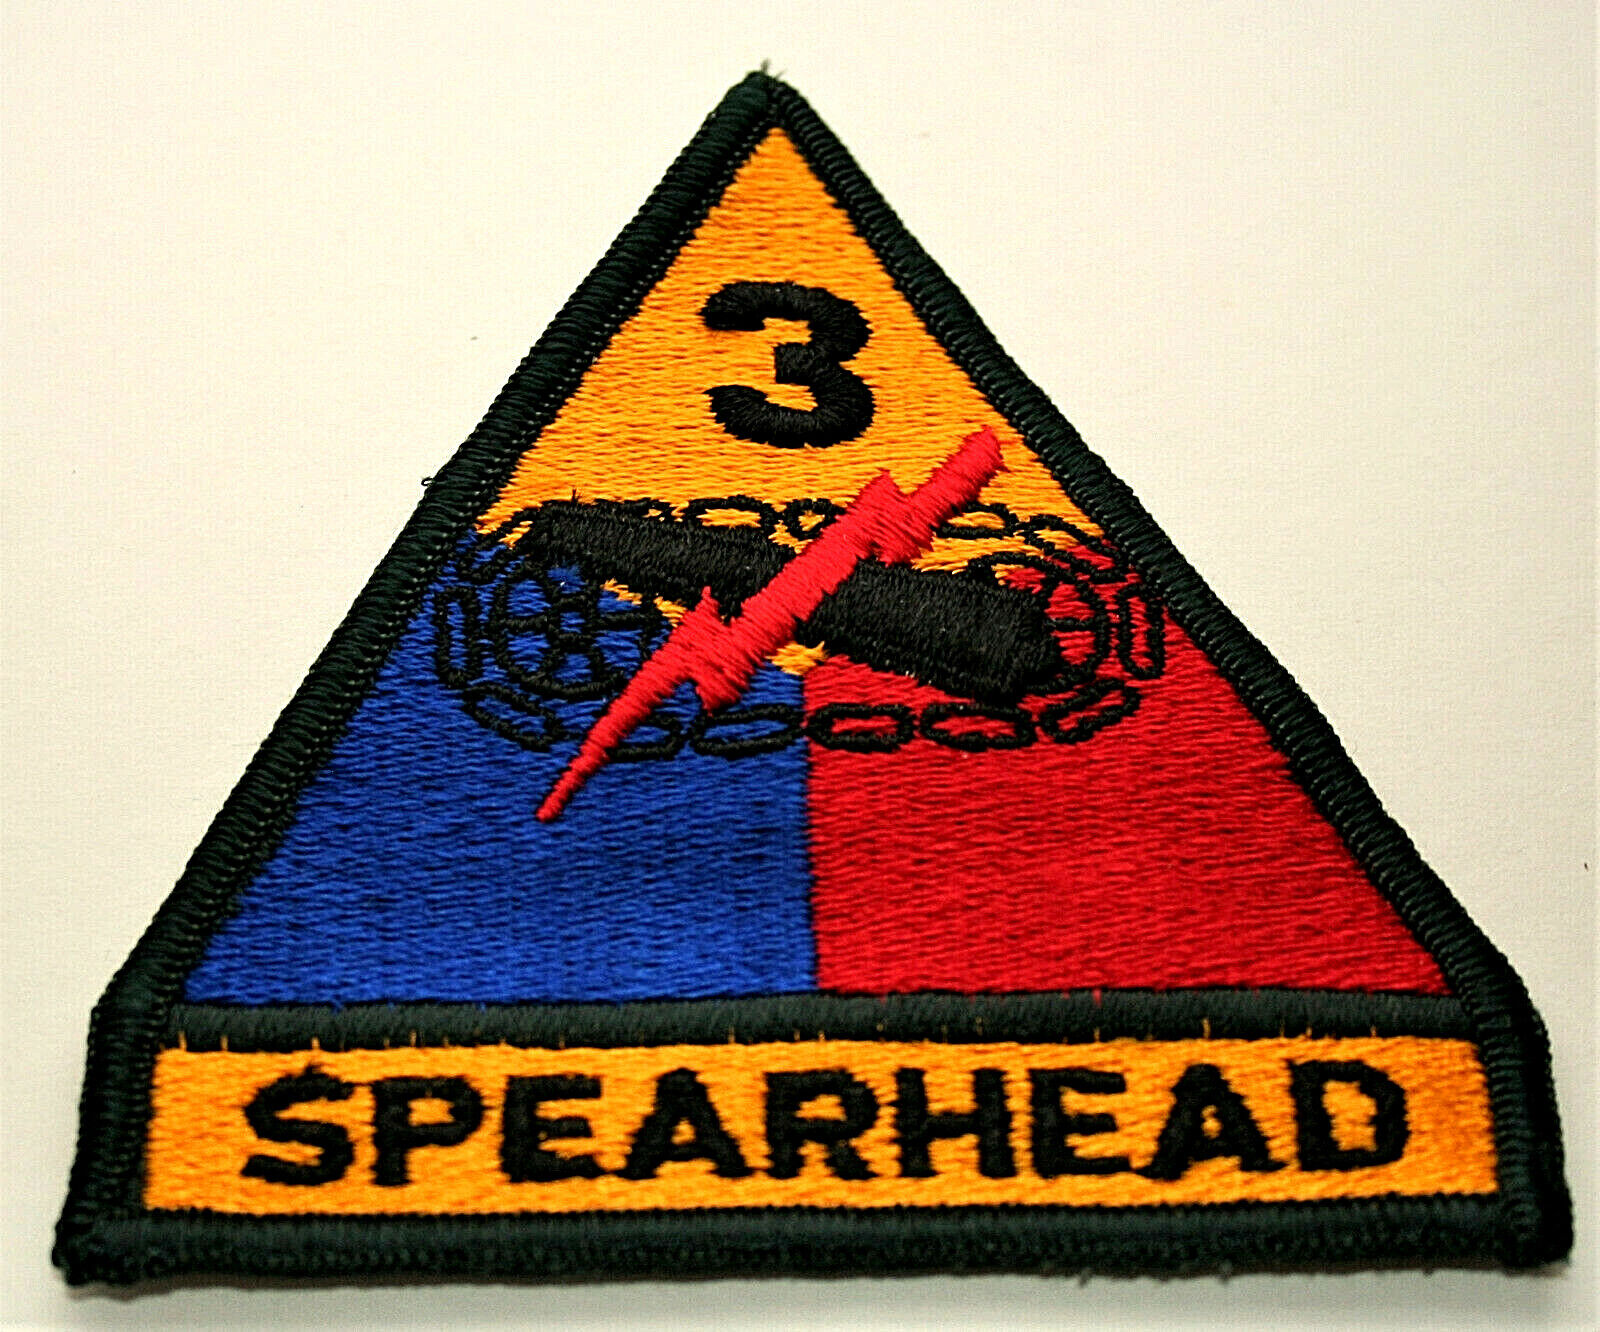 Pre-Vietnam US Army 3rd Armored Spearhead Division Arm Patch NOS New 1940s-50s